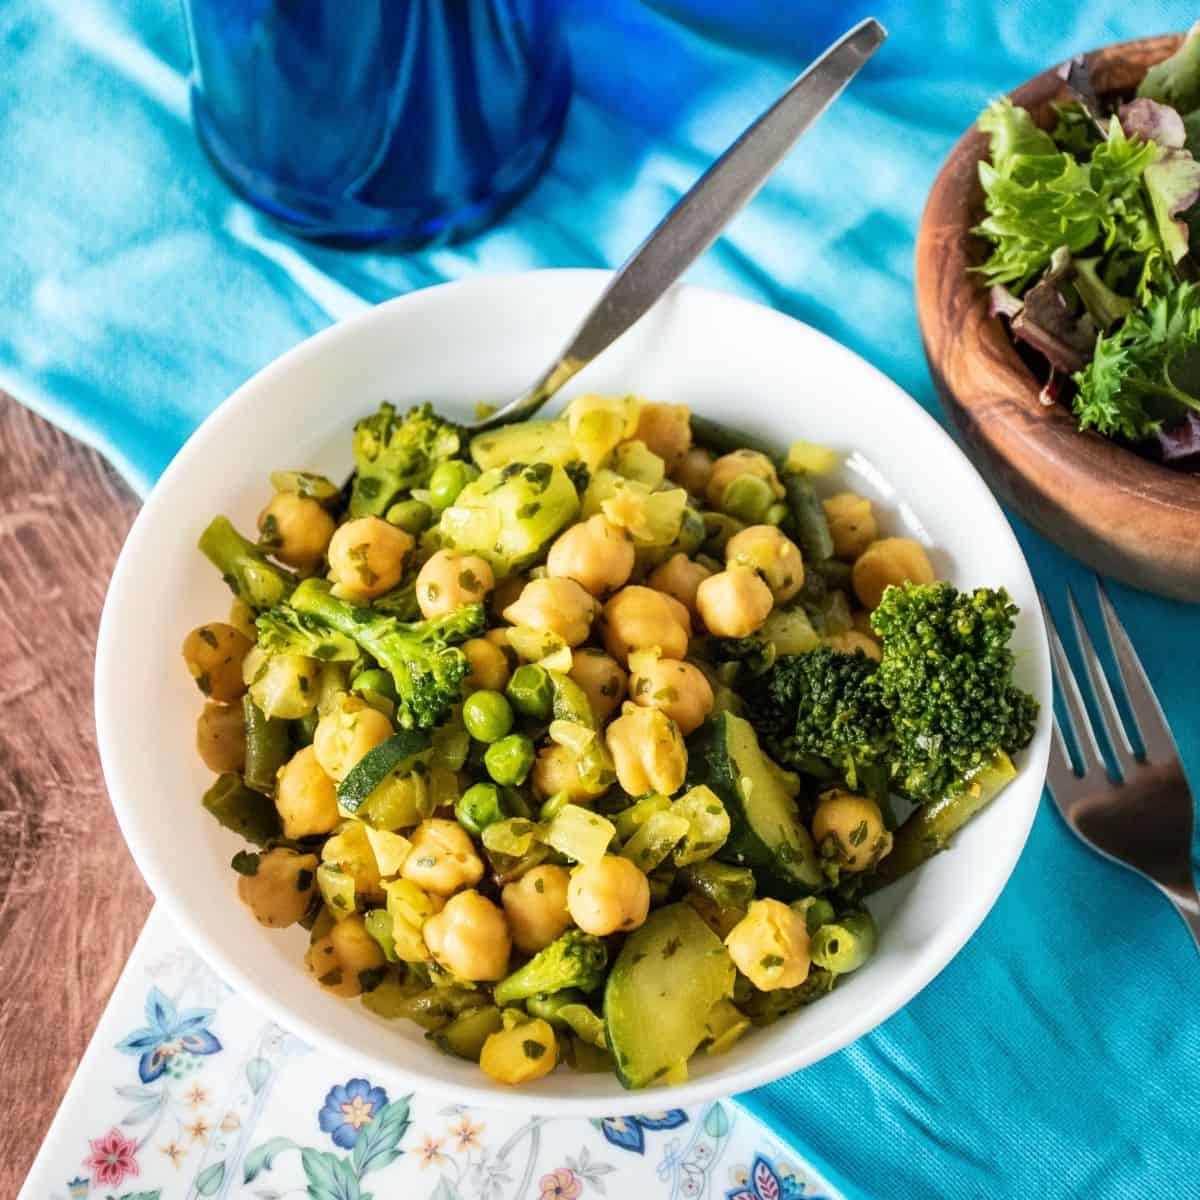 Vegetable hash with chickpeas in a bowl with a salad to the side.